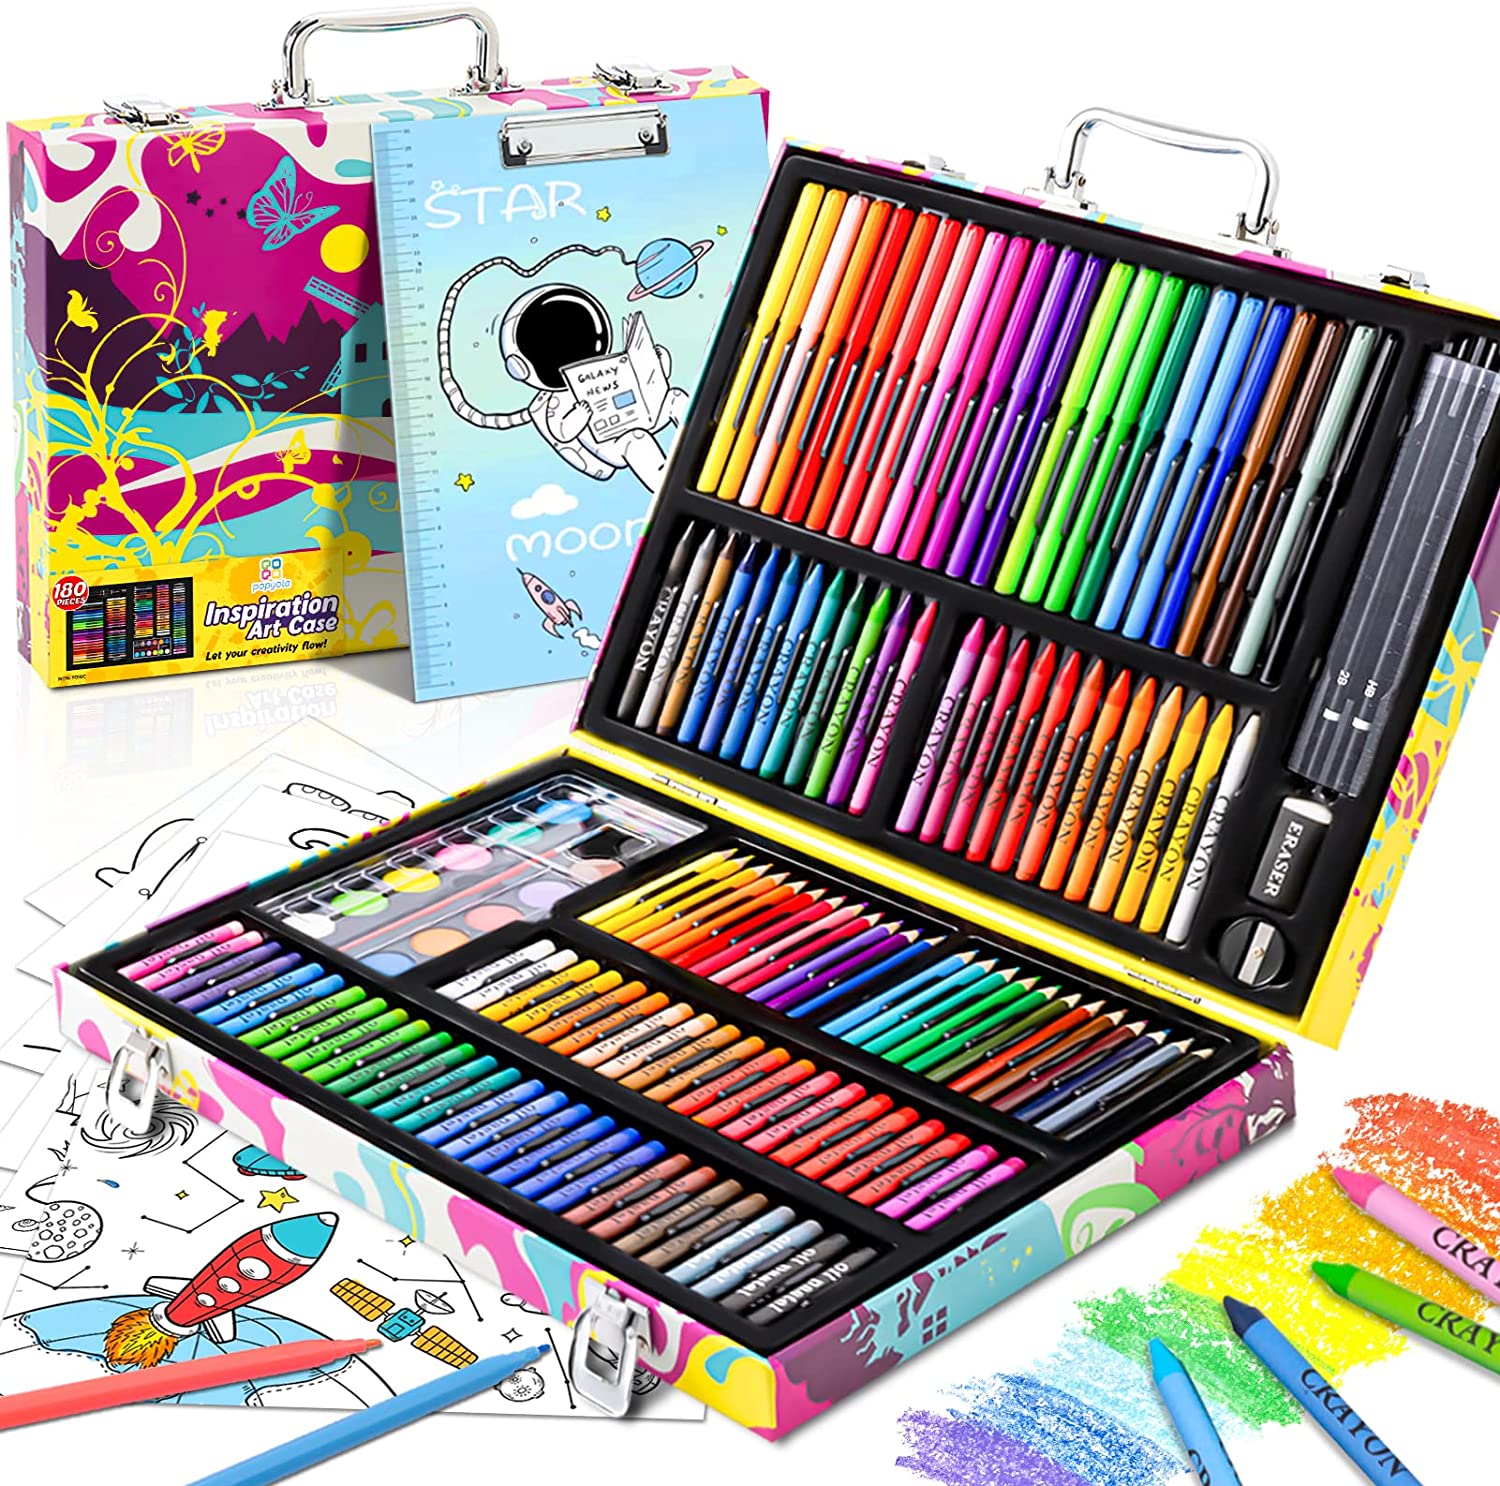  Art Supplies Set for Kids, 304 PCS Drawing Art Kit for Kids  6-12 Girls and Boys, Deluxe Gift Art Box with Double-Sided Trifold Easel,  Art Set with Oil Pastels, Crayons, Colored